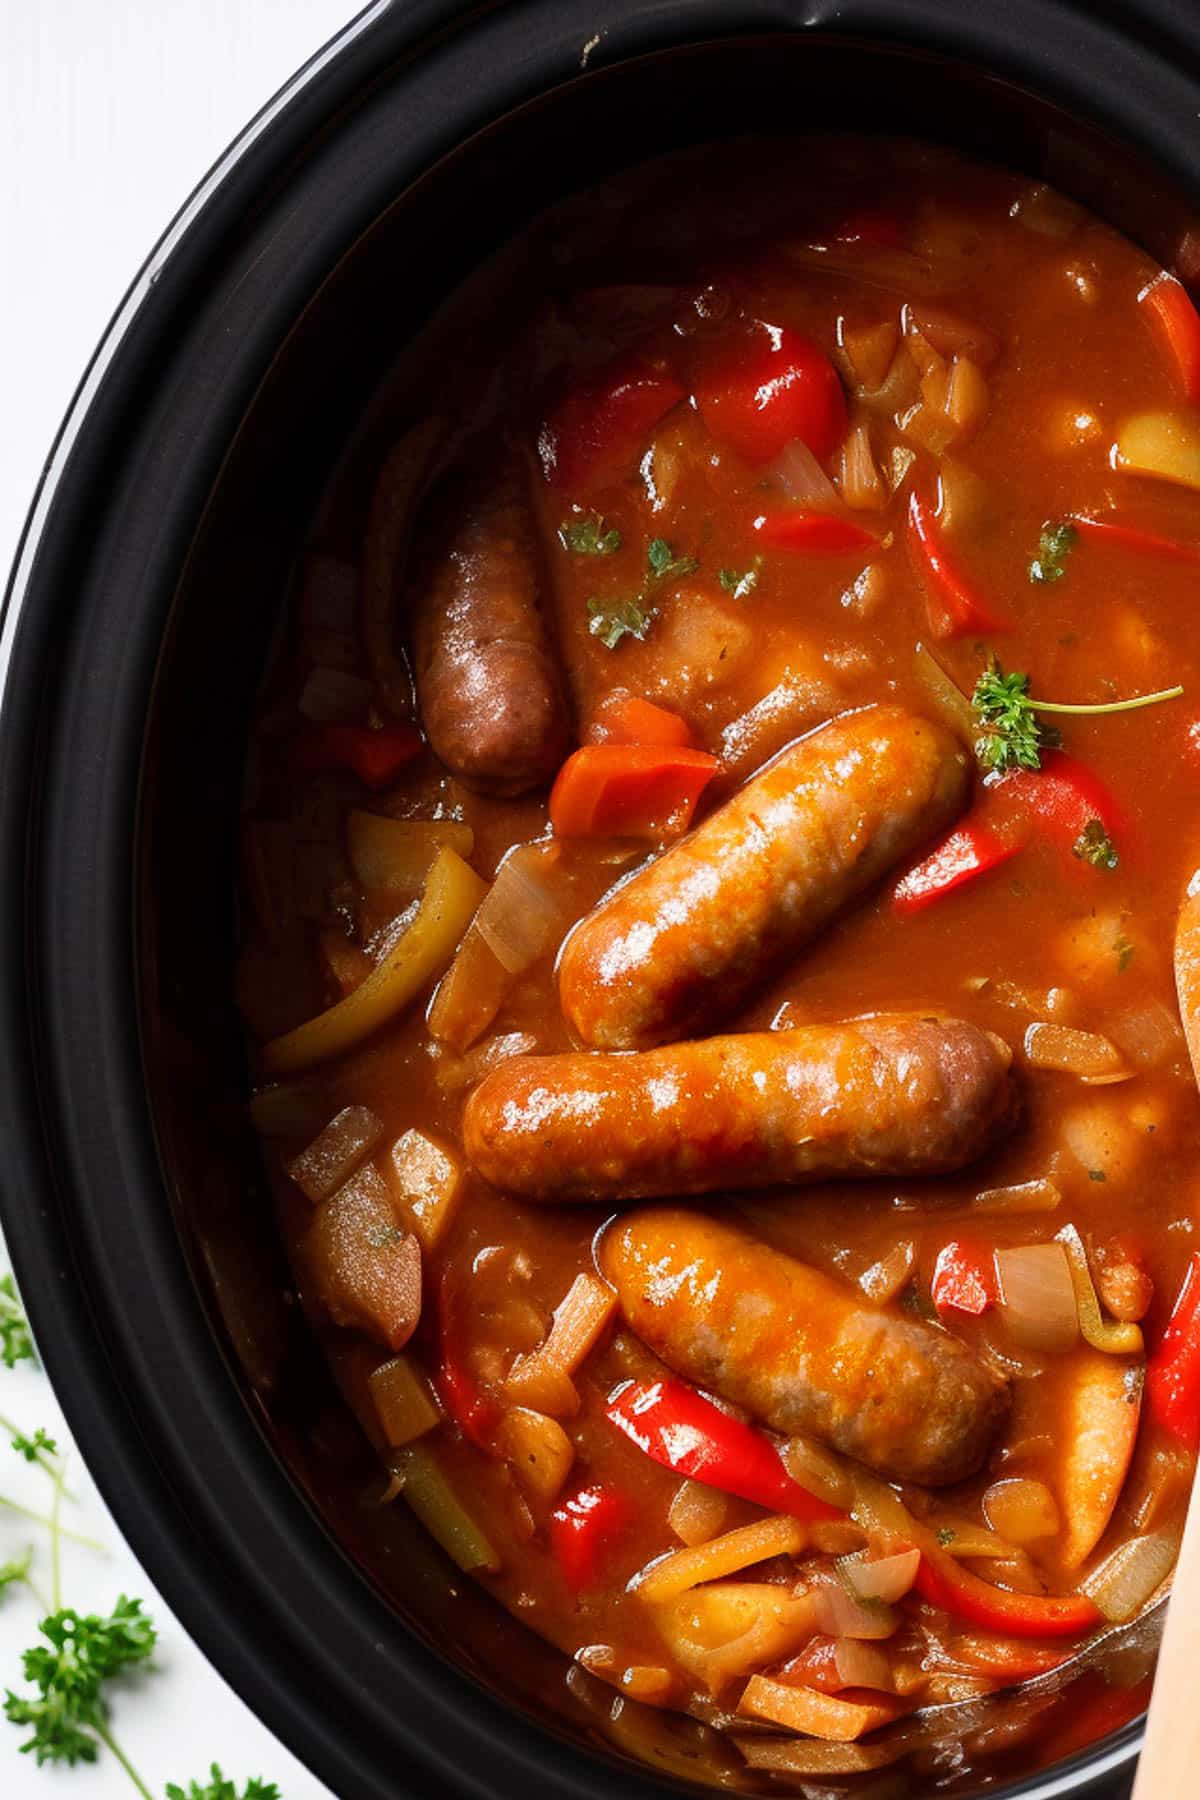 Slow cooker sausage casserole in the slow cooker.